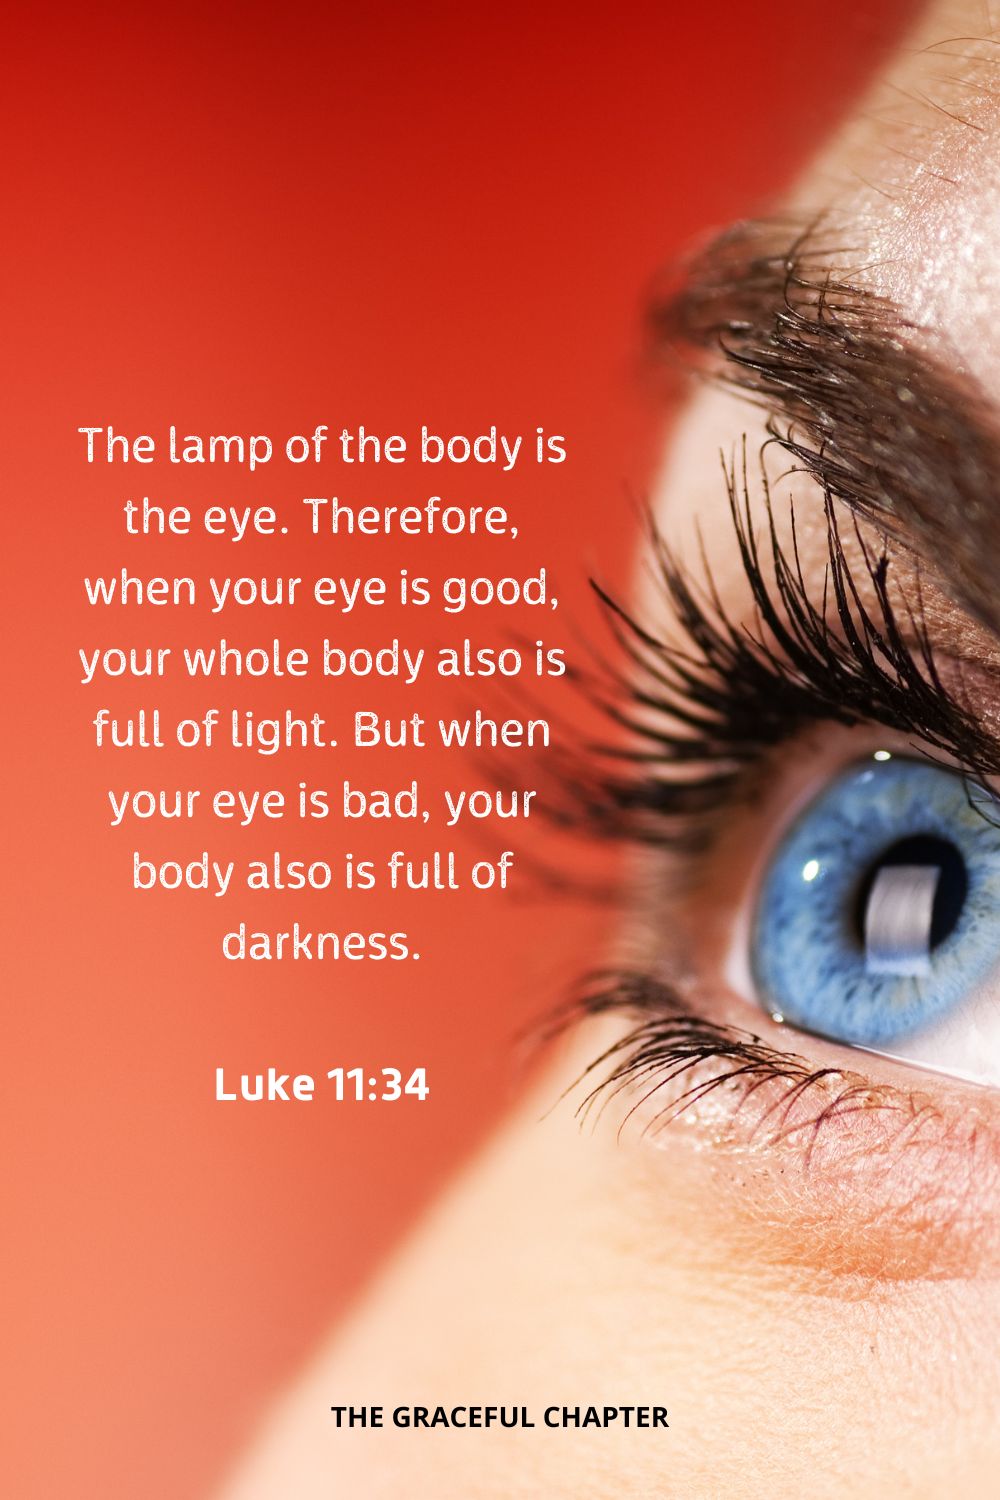 The lamp of the body is the eye. Therefore, when your eye is good, your whole body also is full of light. But when your eye is bad, your body also is full of darkness.